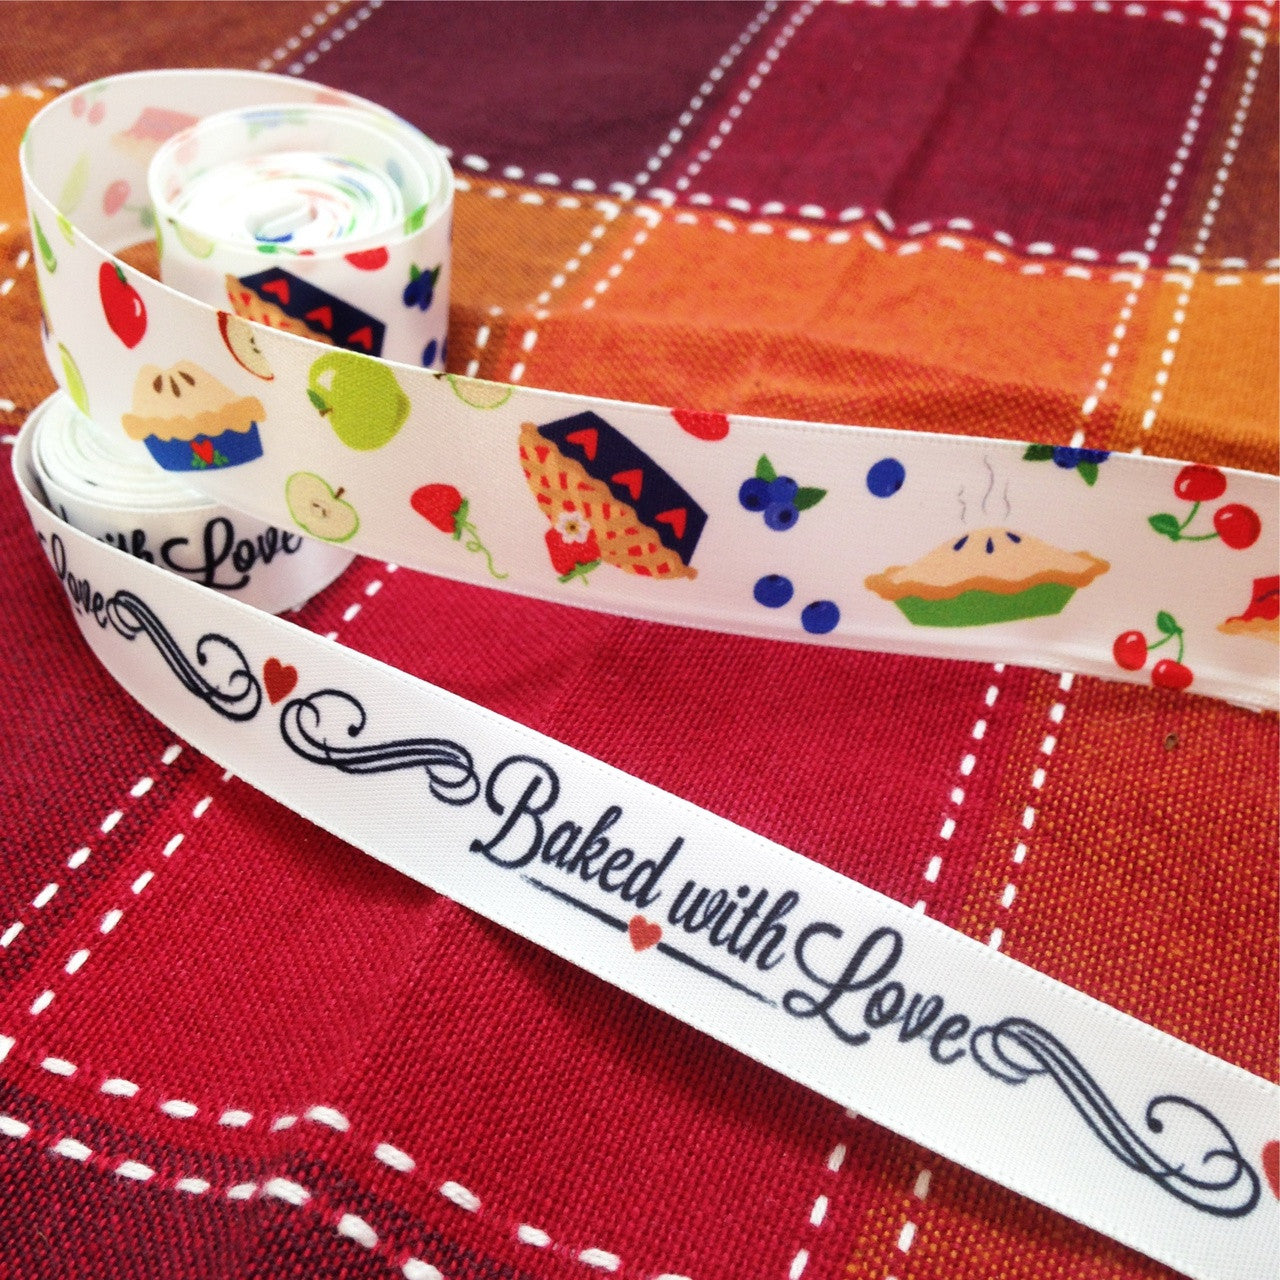 Pie Ribbon, tossed  with fruits and berries on 7/8" white single face satin